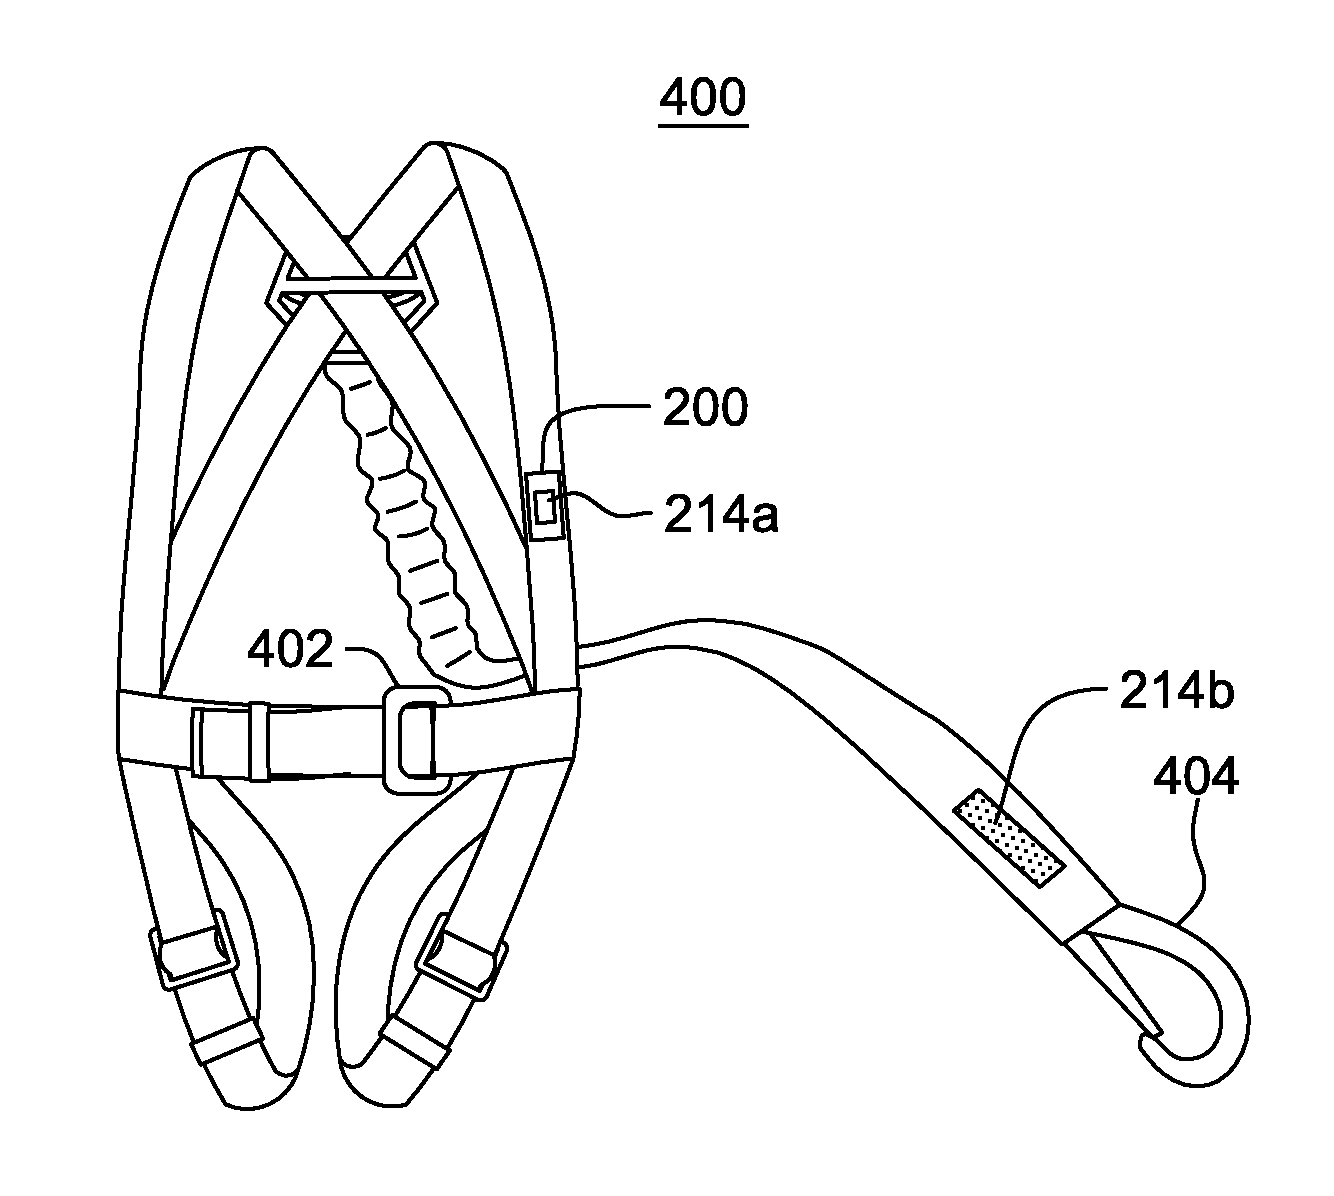 Safety harness monitoring and alerting system